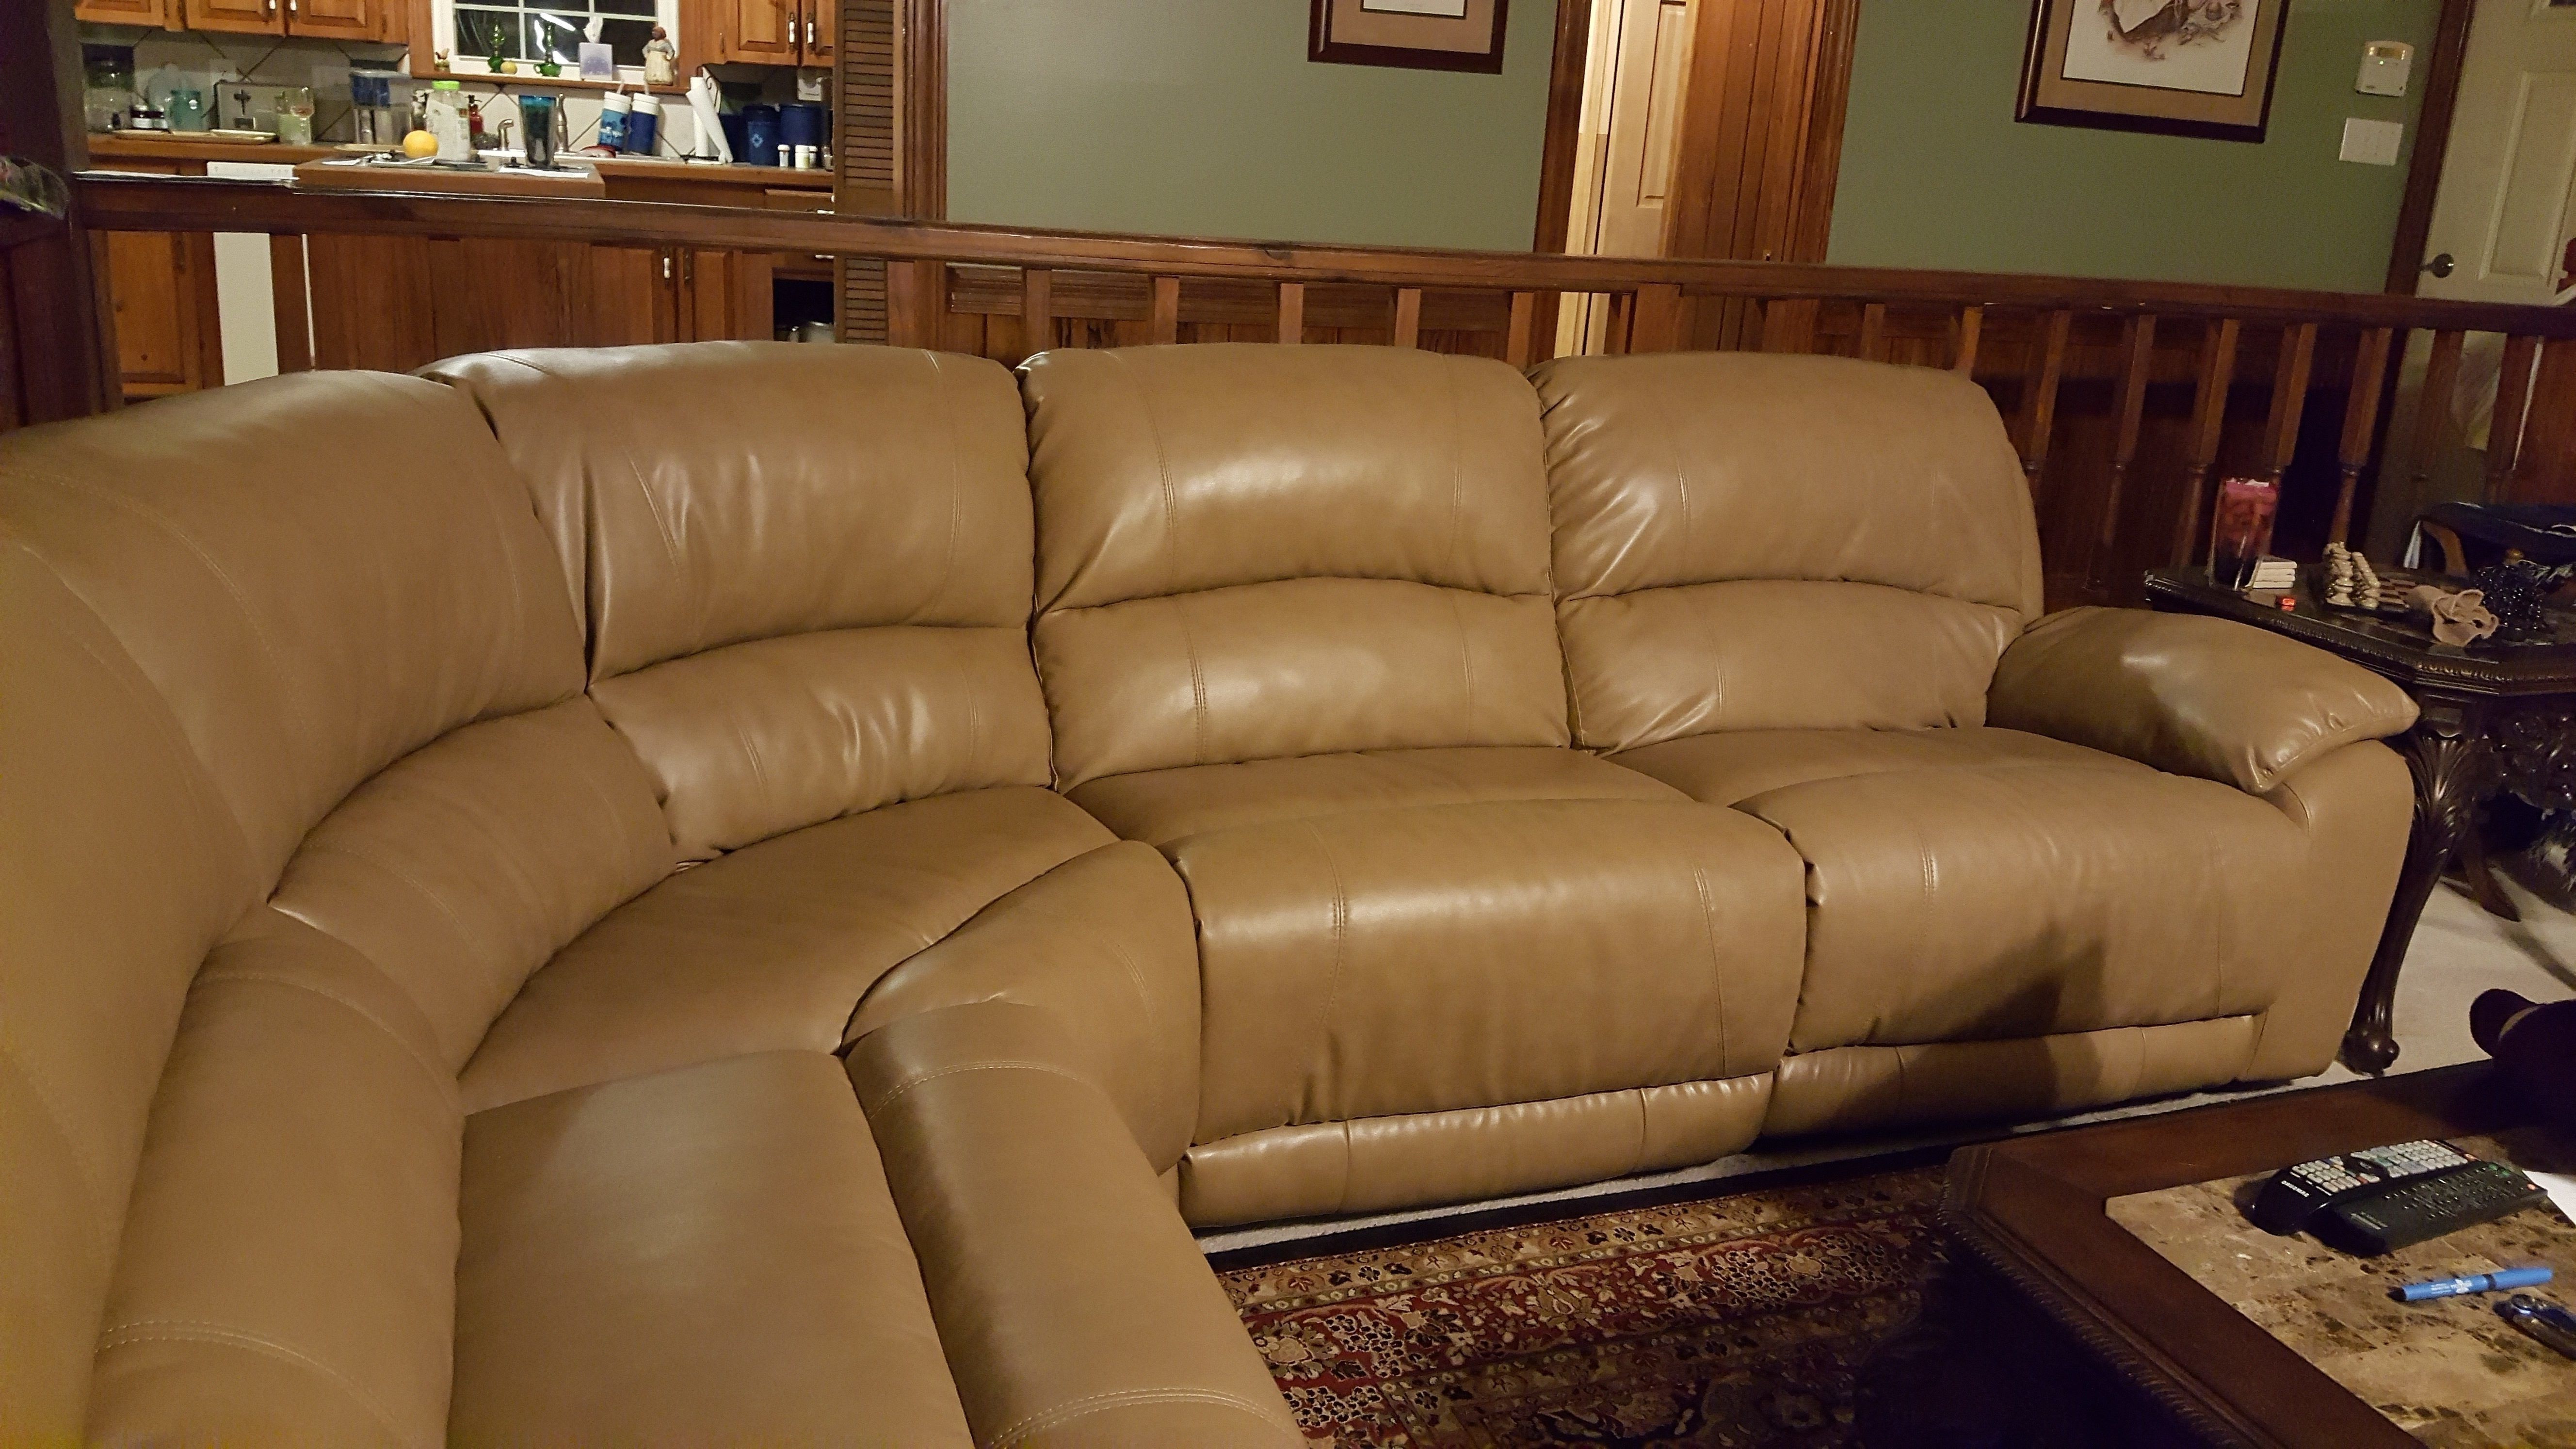 Rooms To Go Couches – Free Online Home Decor – Techhungry With Regard To Preferred Sectional Sofas At Rooms To Go (View 12 of 20)